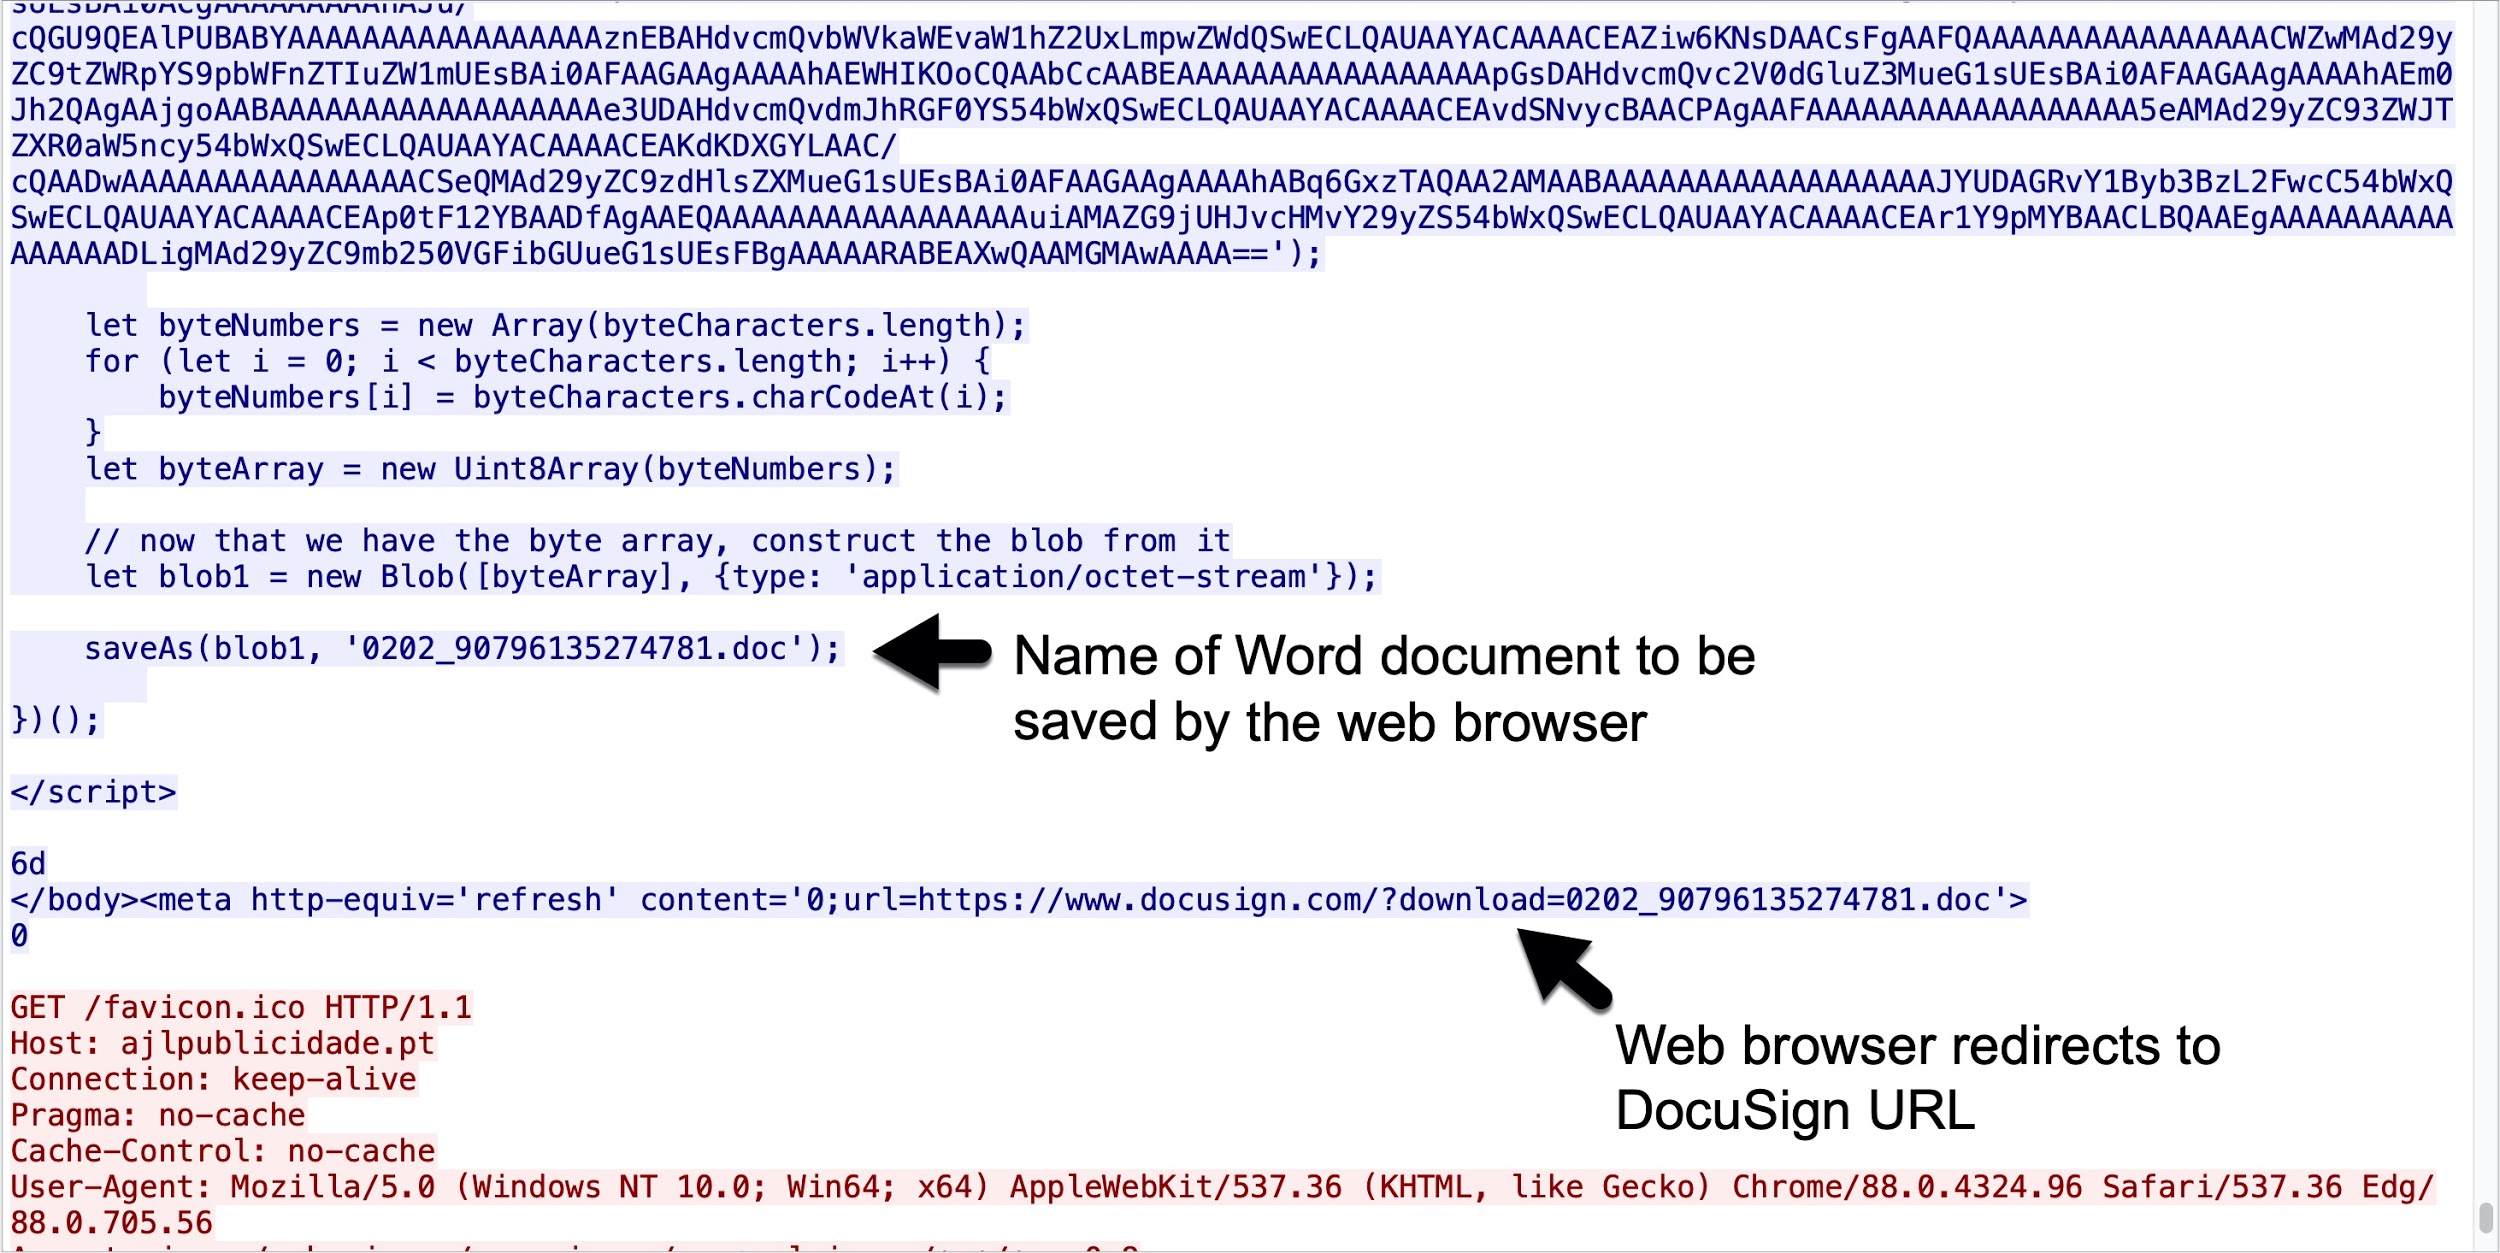 Black arrows indicate the name of the Word document to be saved by the web browser and where the web browser redirects to a DocuSign URL. 